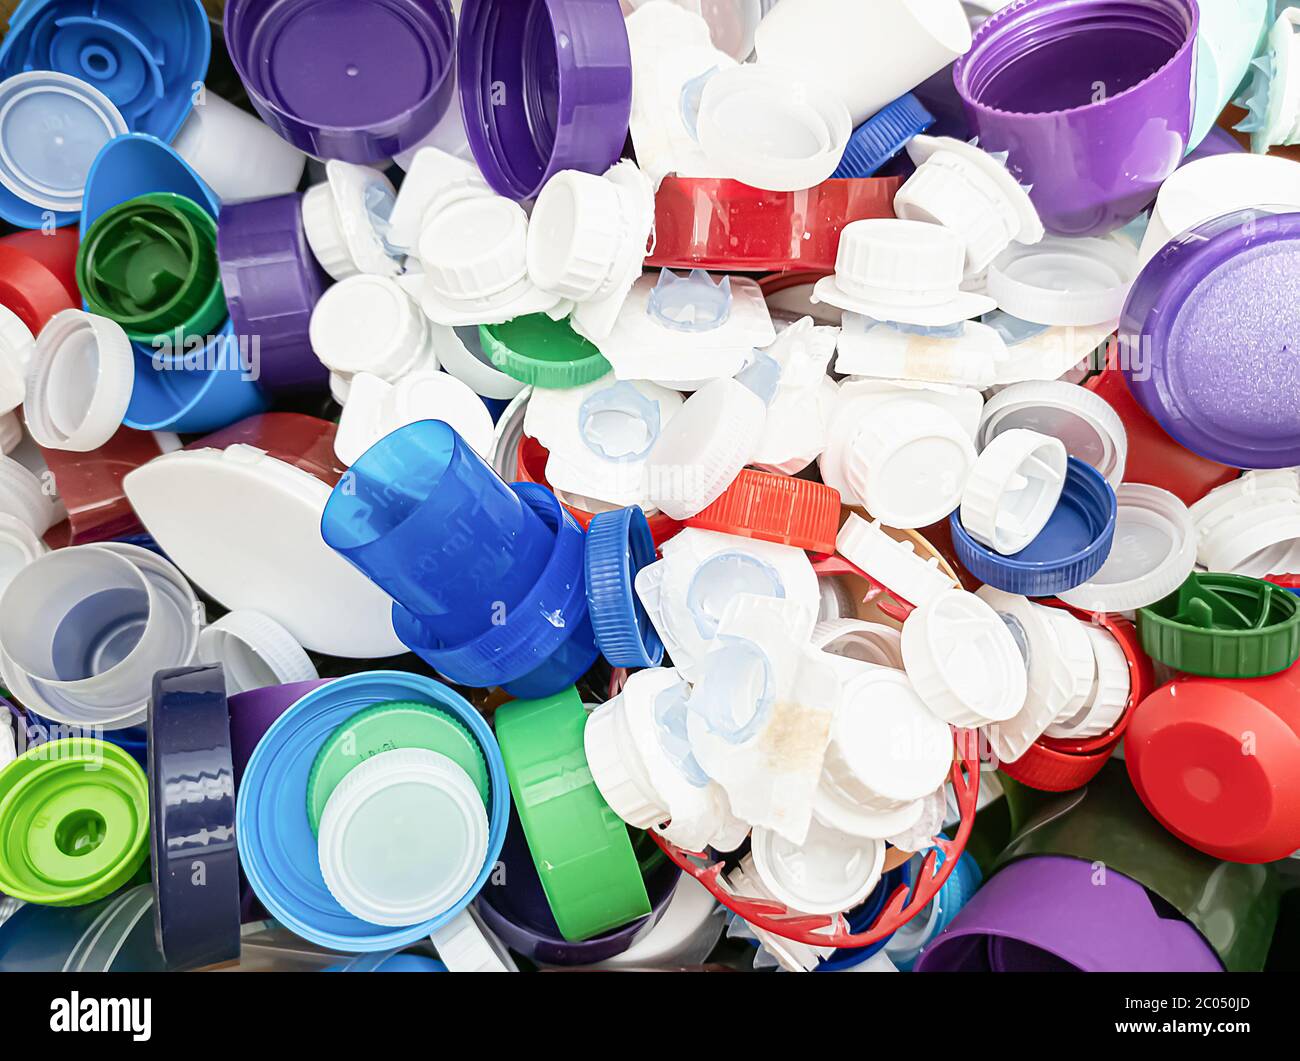 Plastic bottle caps of assorted colors and sizes ready for recycle Stock Photo